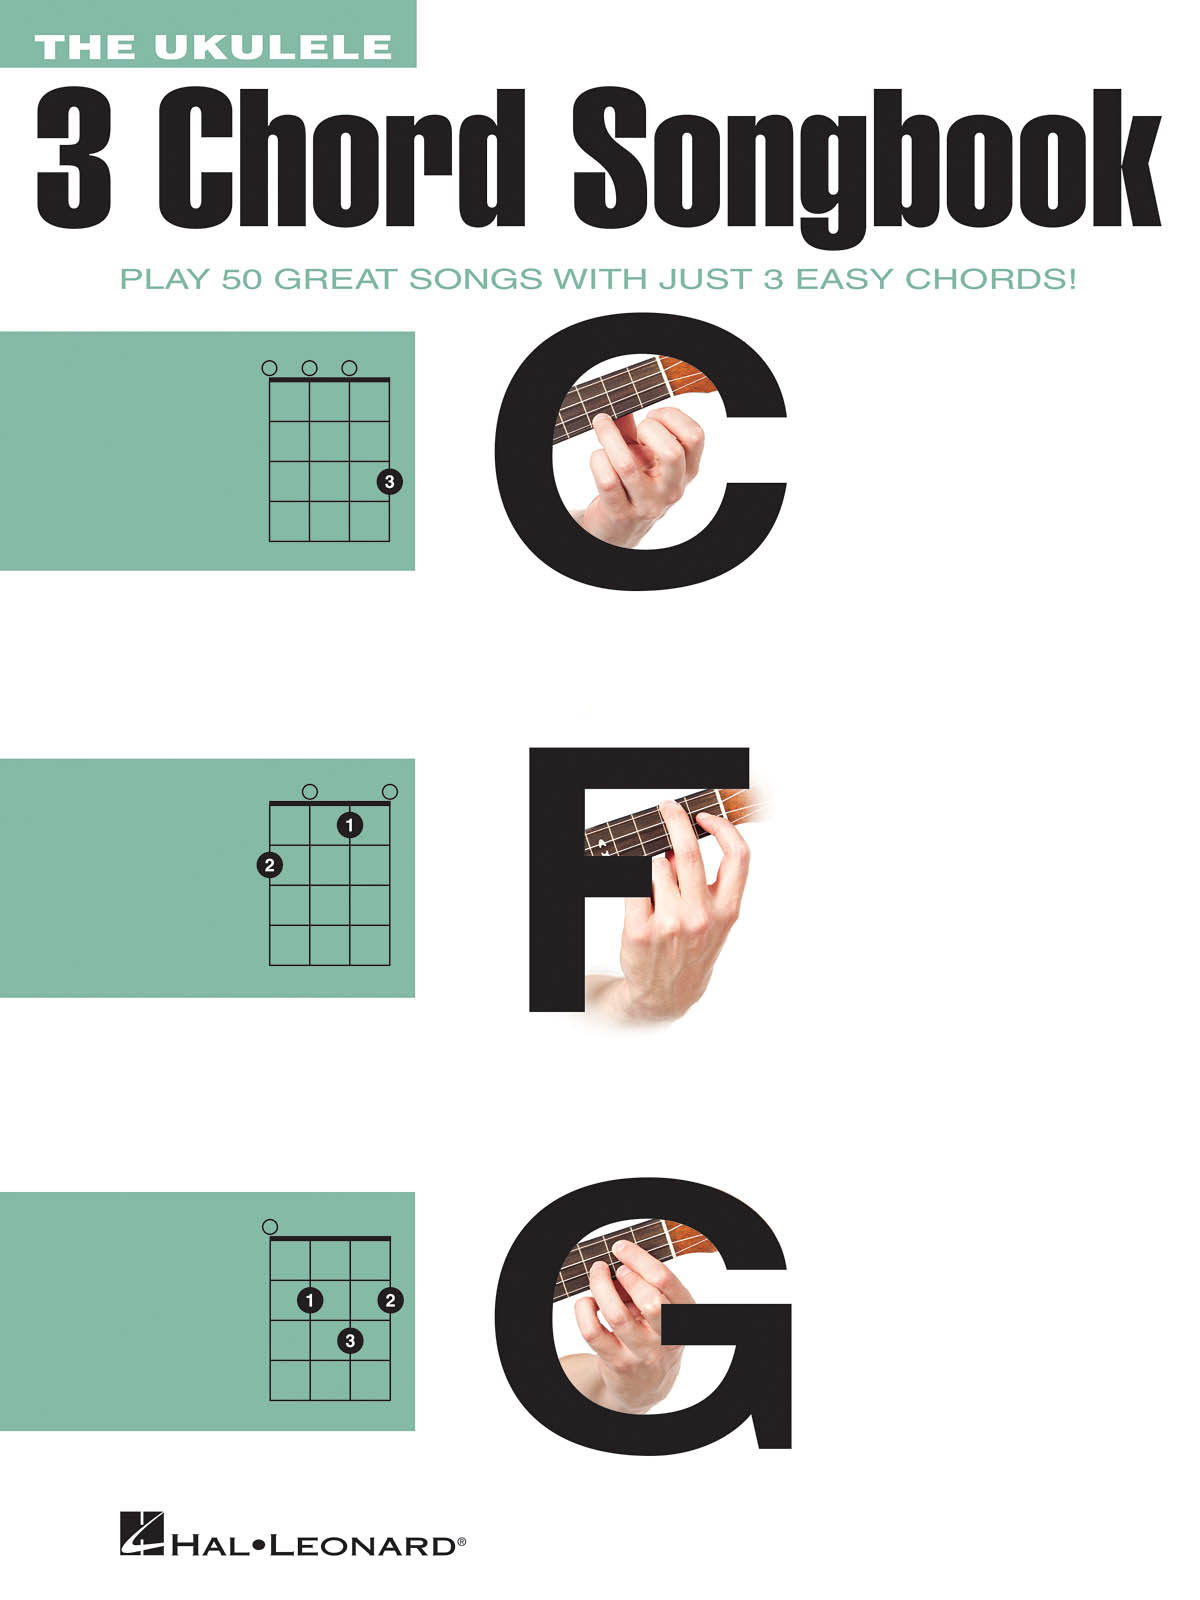 The Ukulele 3 Chord Songbook - Play 50 Great Songs with Just 3 Easy Chords! noty pro ukulele